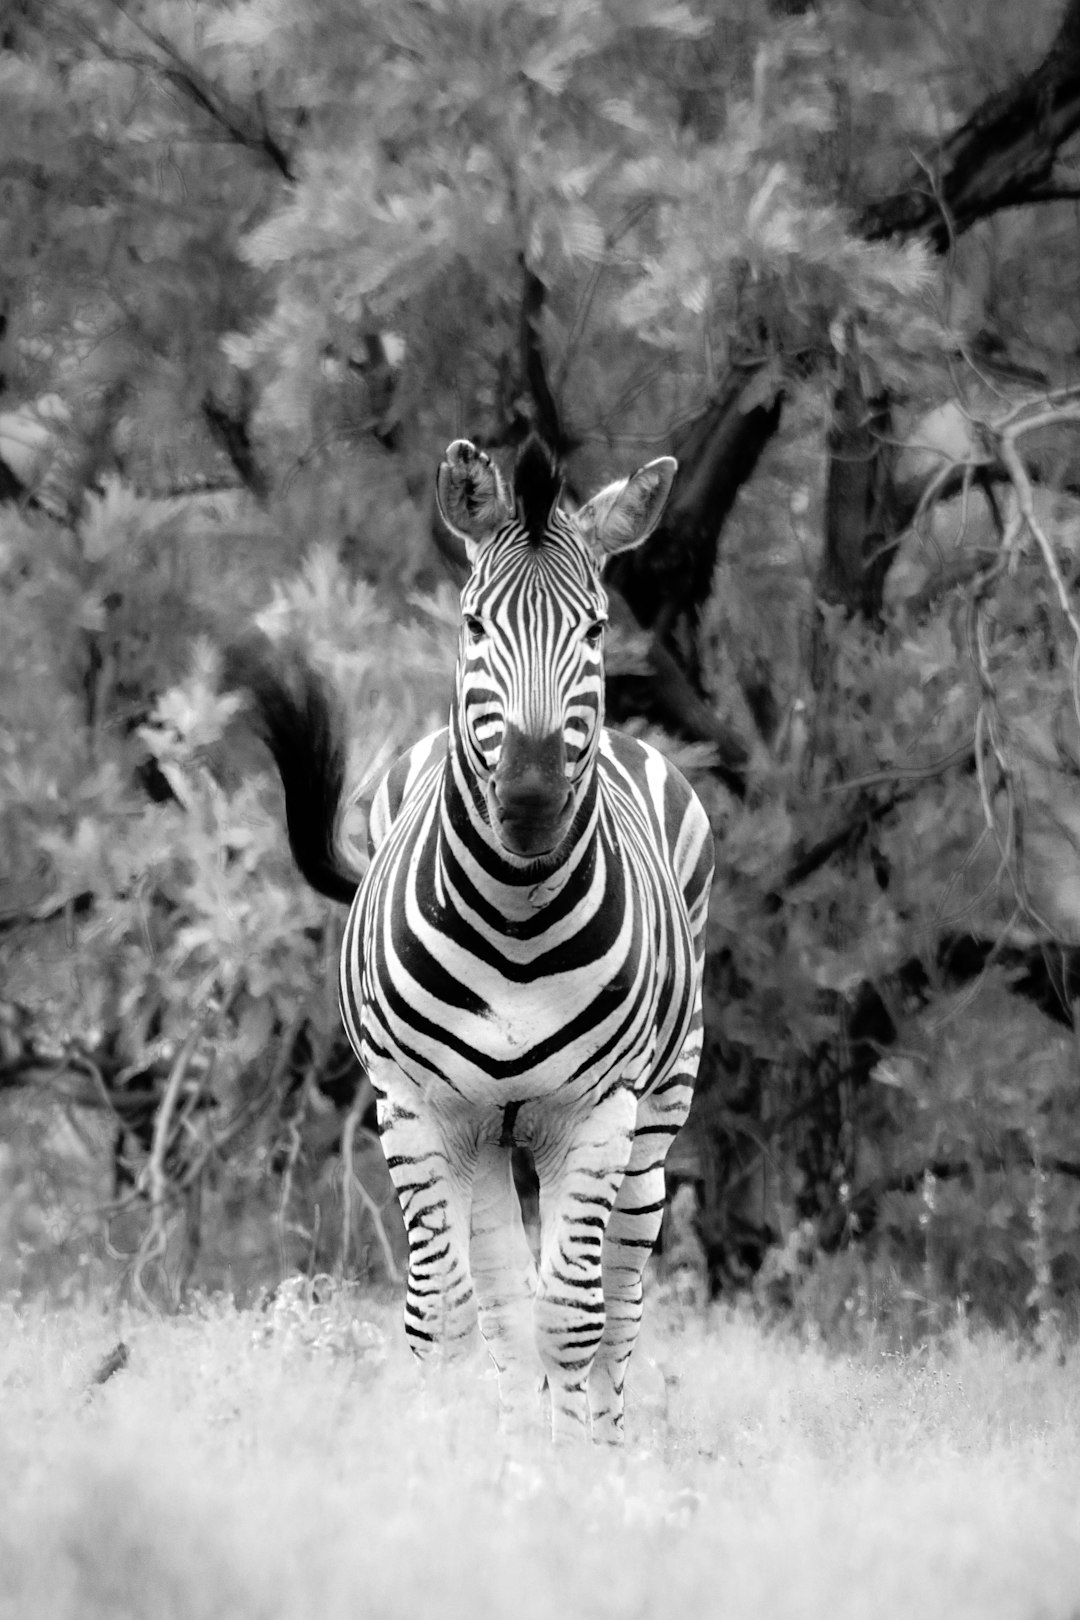 zebra standing on grass field in grayscale photography